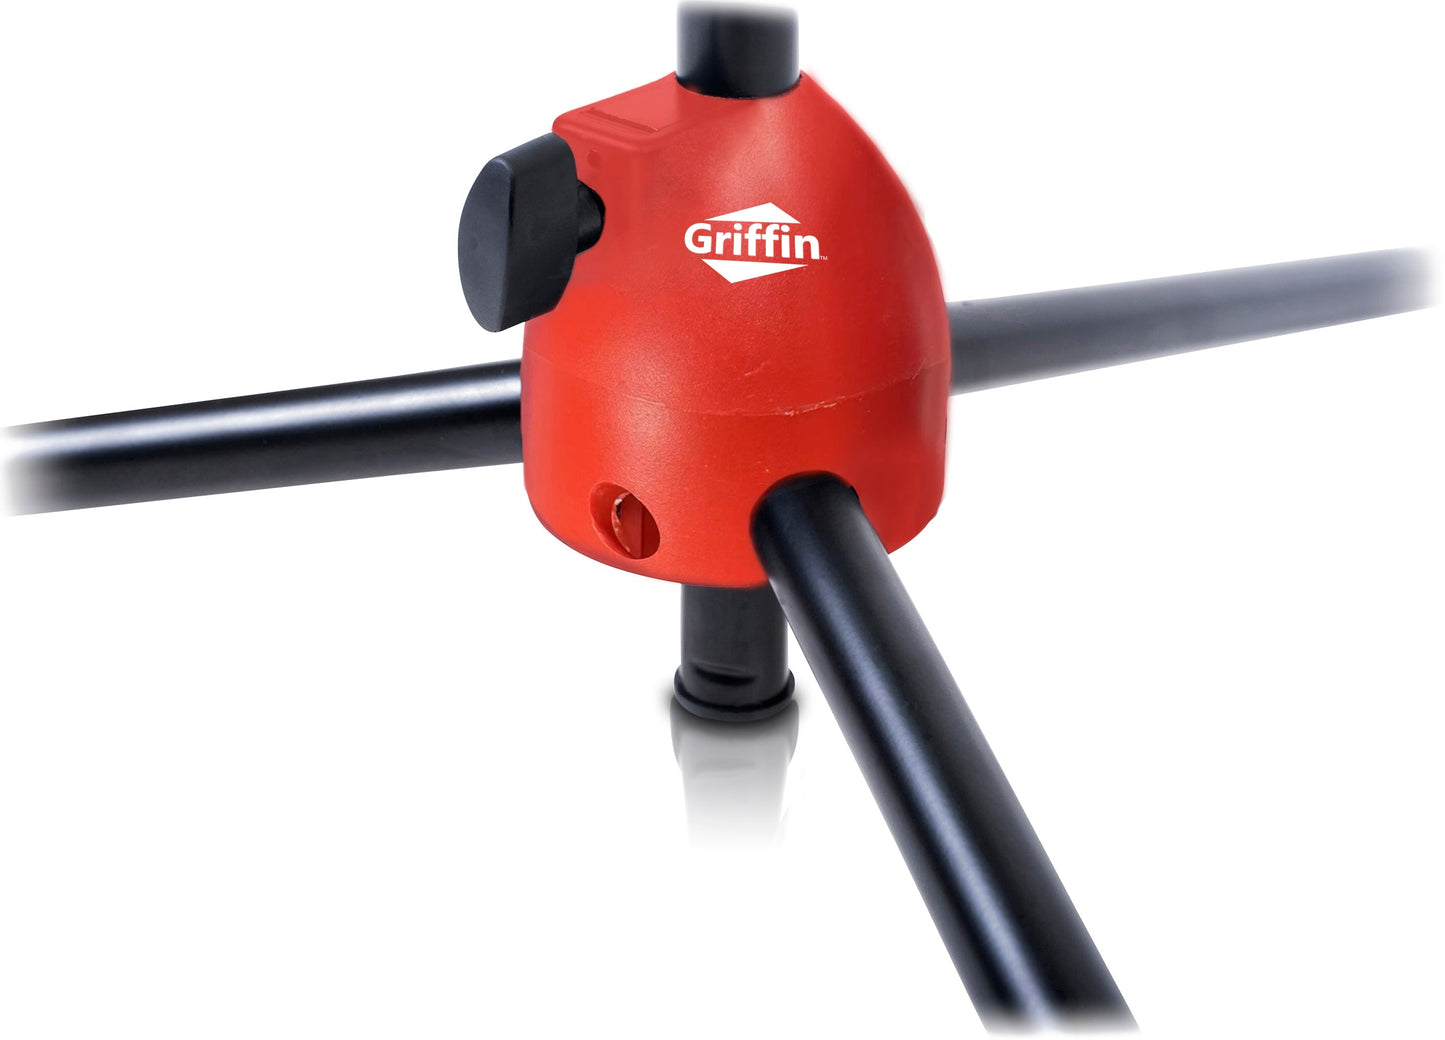 GRIFFIN Microphone Stand (Pack of 5) with XLR Cables & Mic Clip - Telescoping Boom Arm Tripod Legs